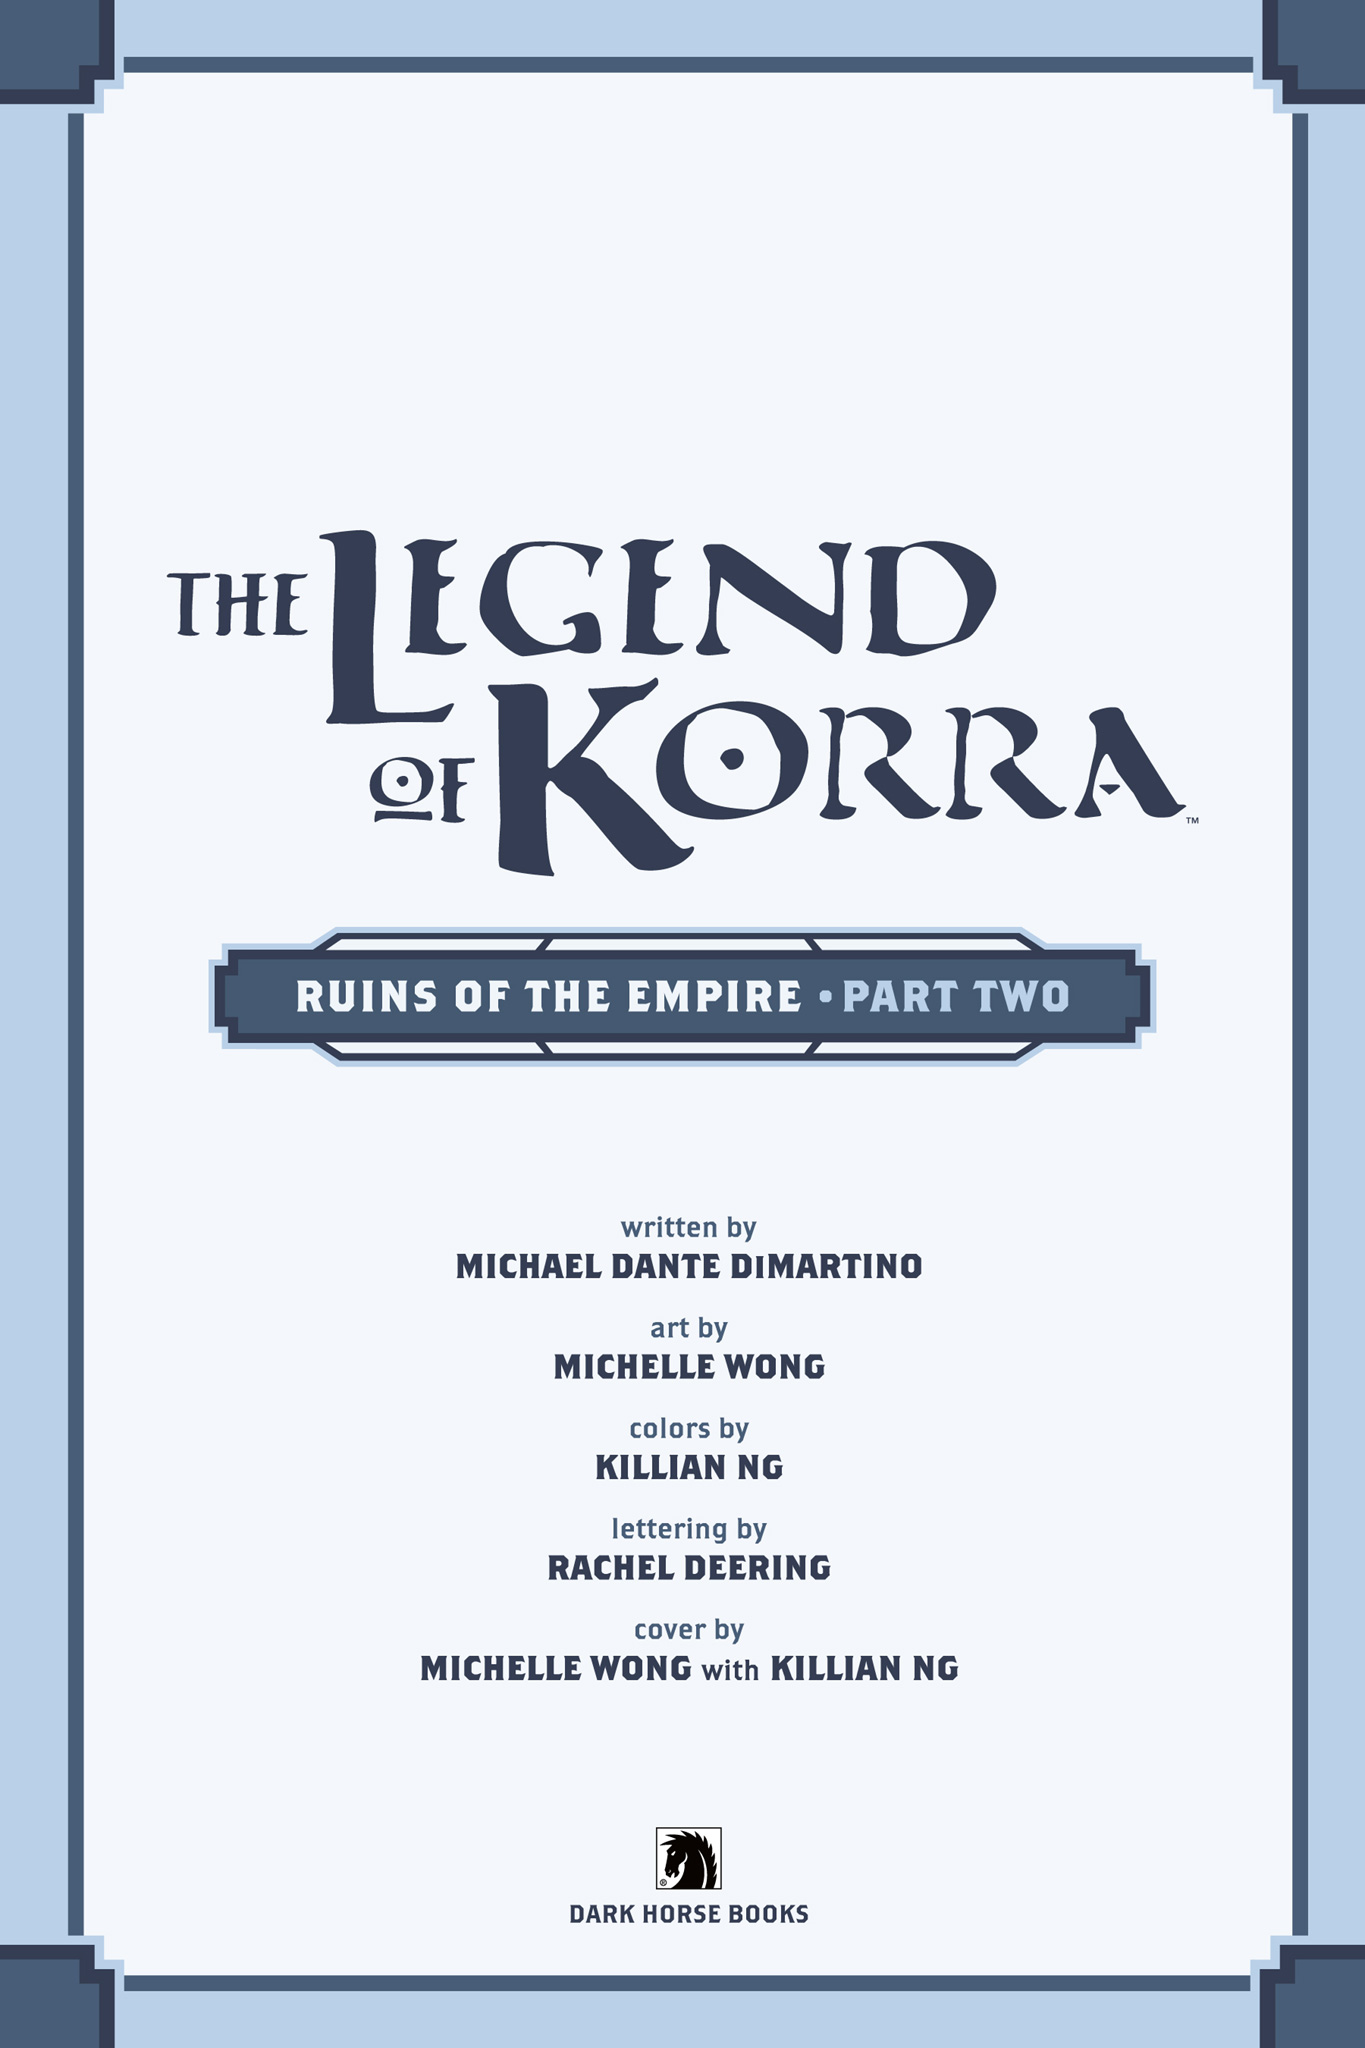 Read online Nickelodeon The Legend of Korra: Ruins of the Empire comic -  Issue # TPB 2 - 5